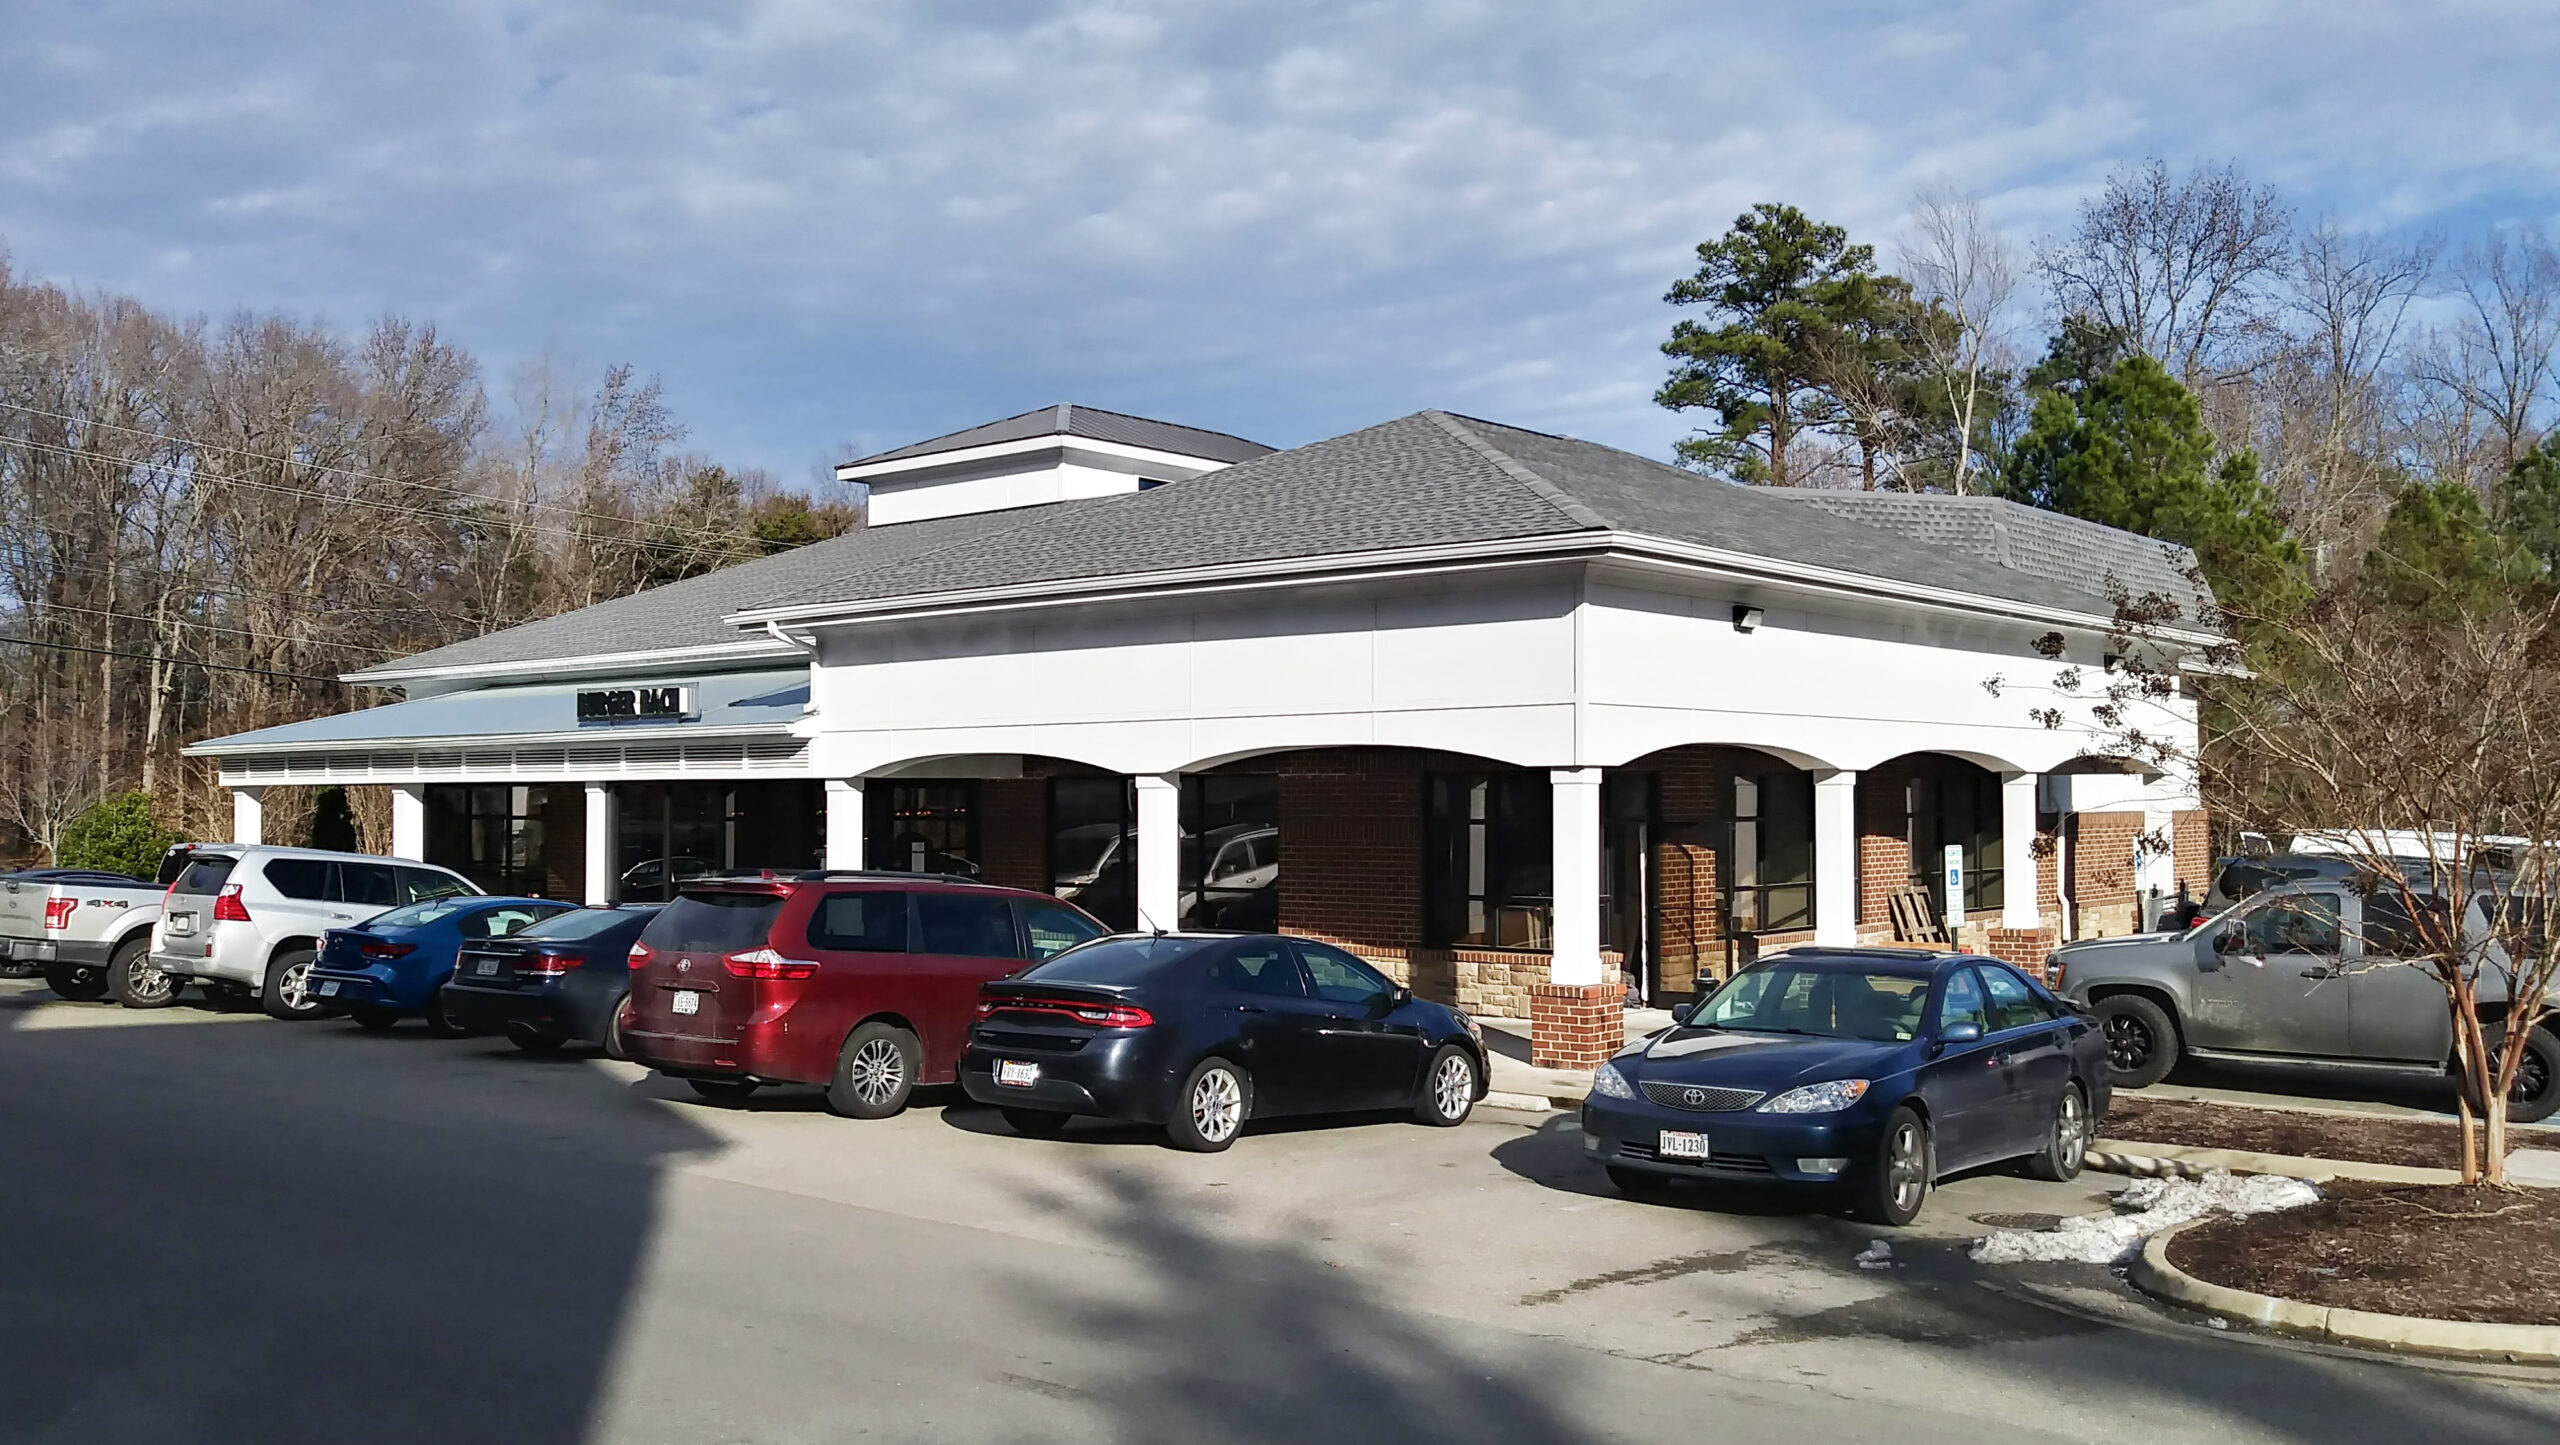 Richmond physical therapy practice buys Midlothian building